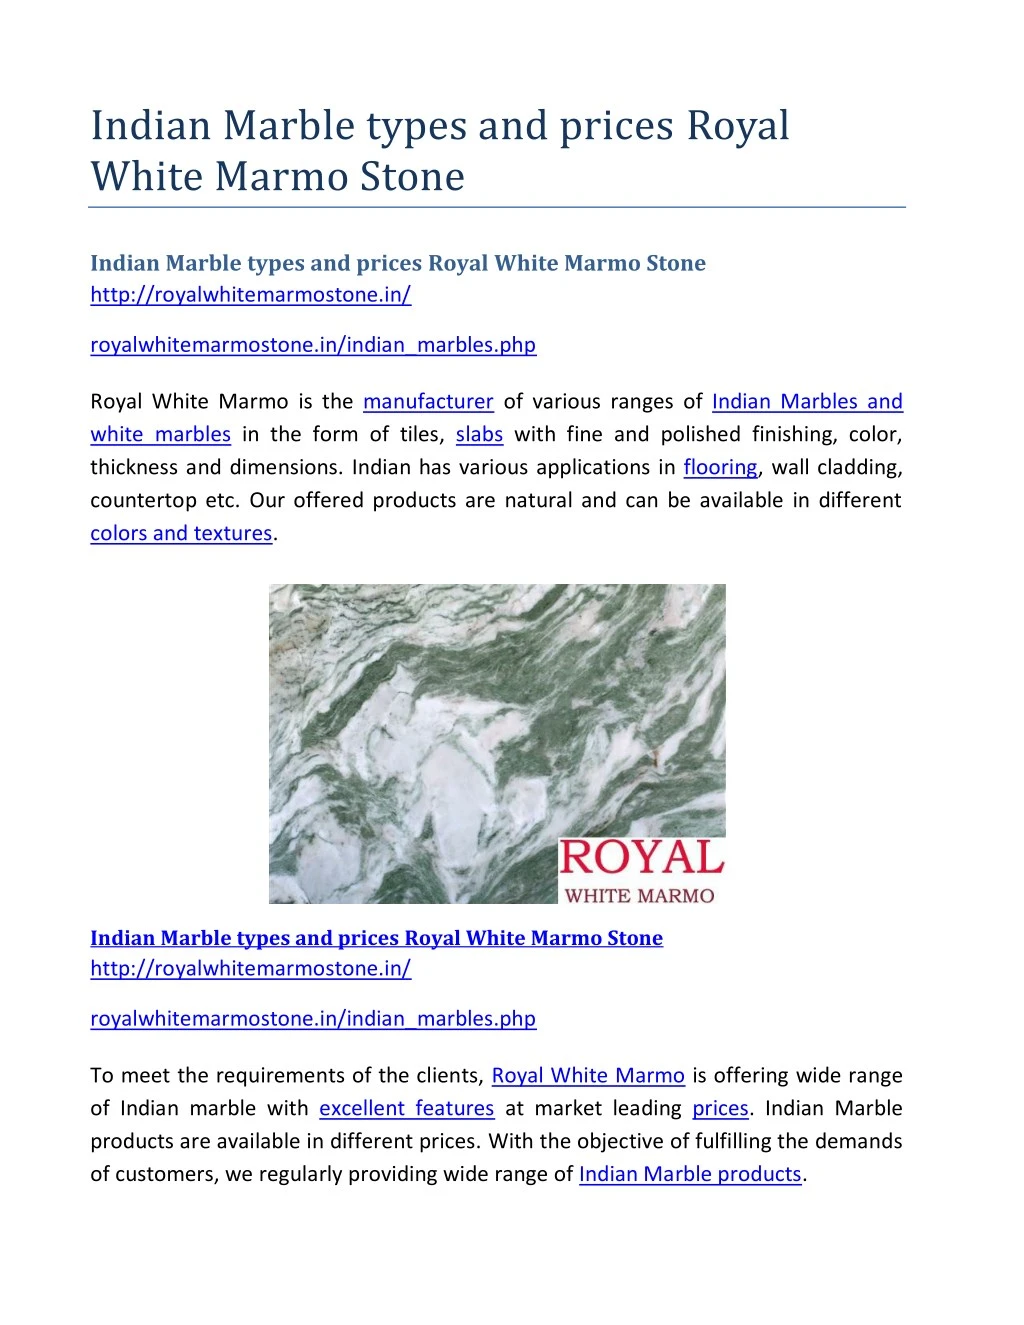 indian marble types and prices royal white marmo